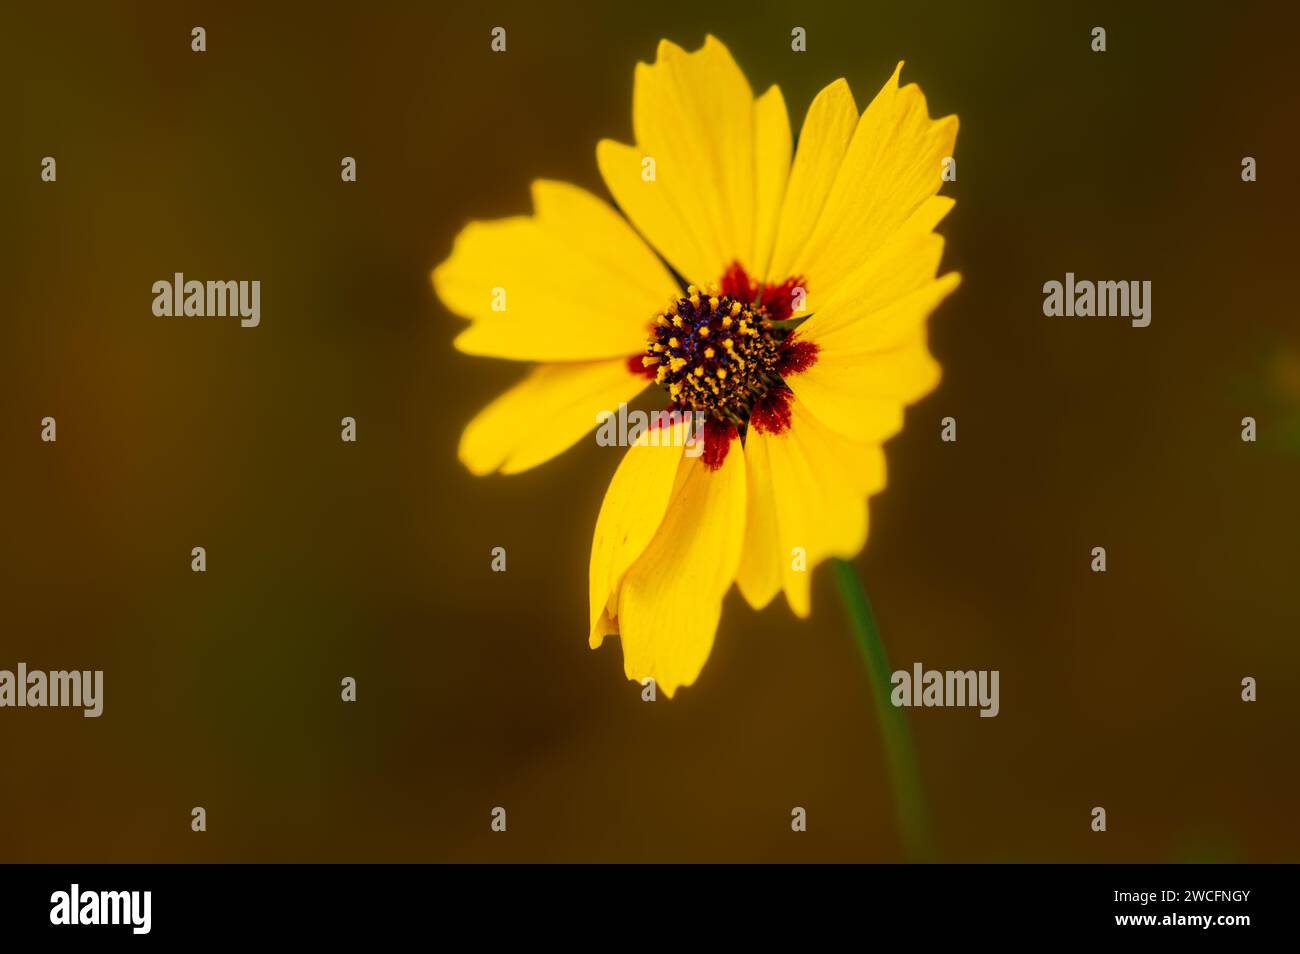 vibrant yellow flower with black and red accents Stock Photo